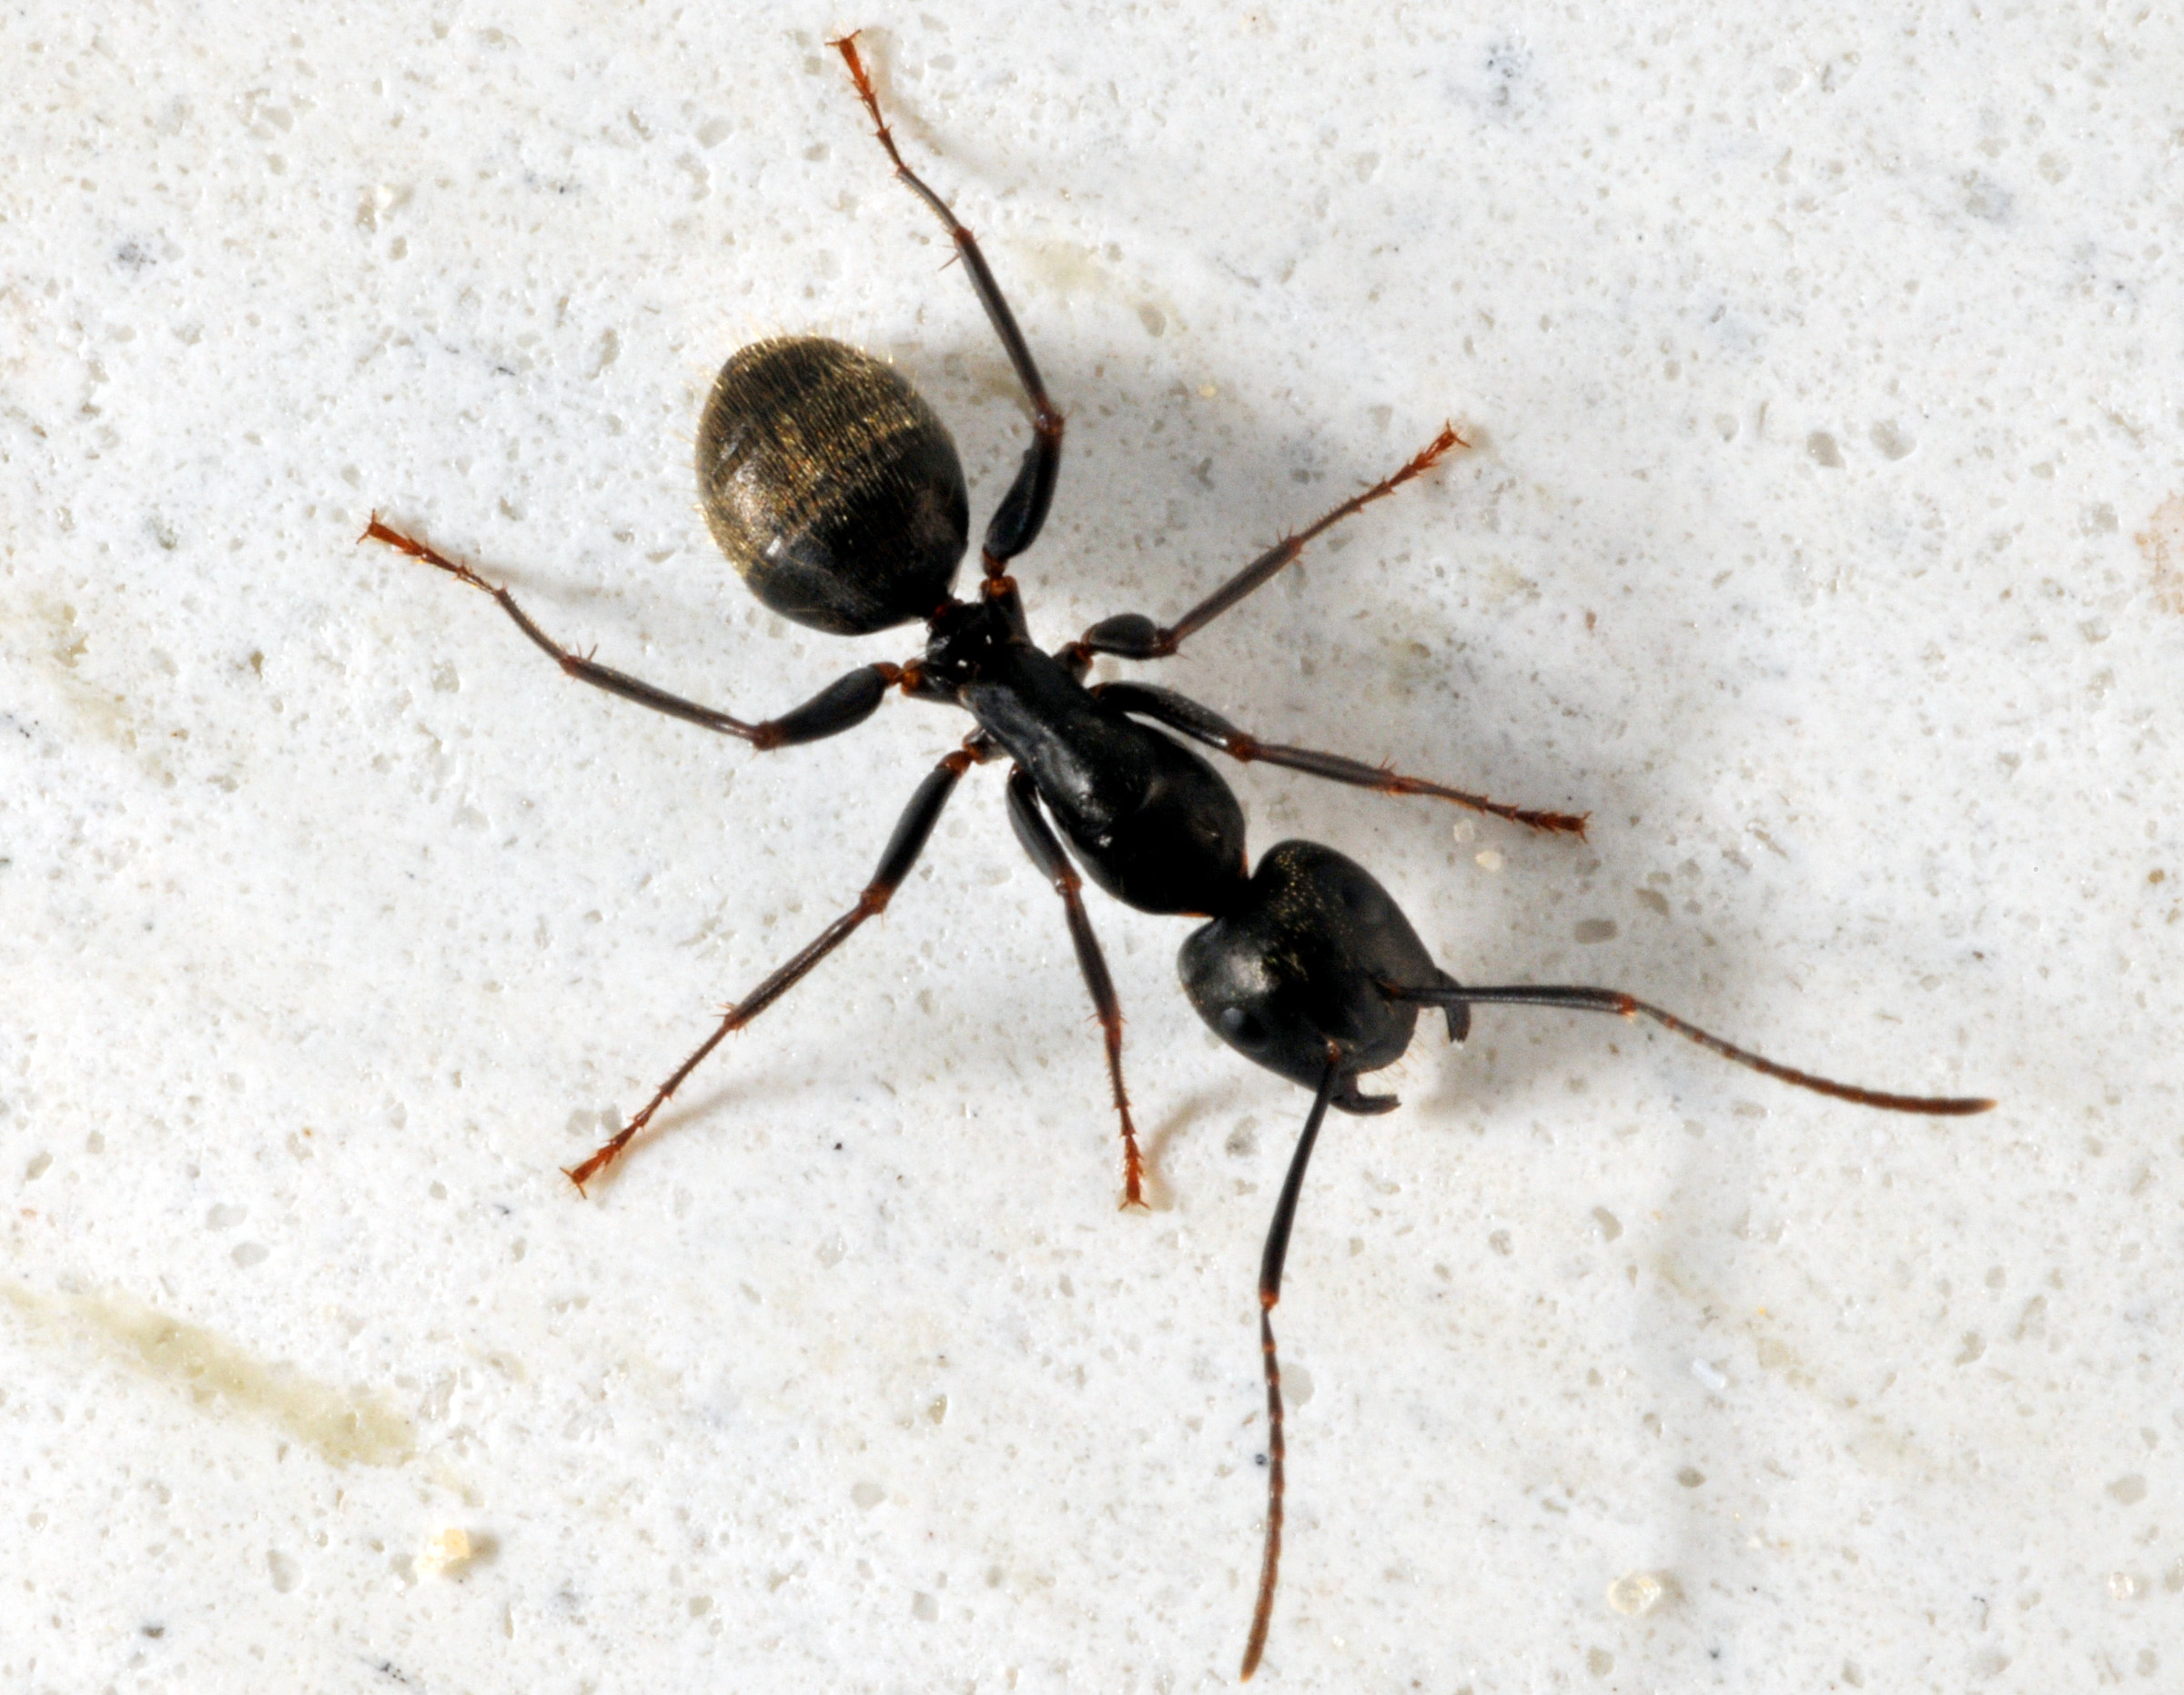 What Are the Big Black Ants in My Home?